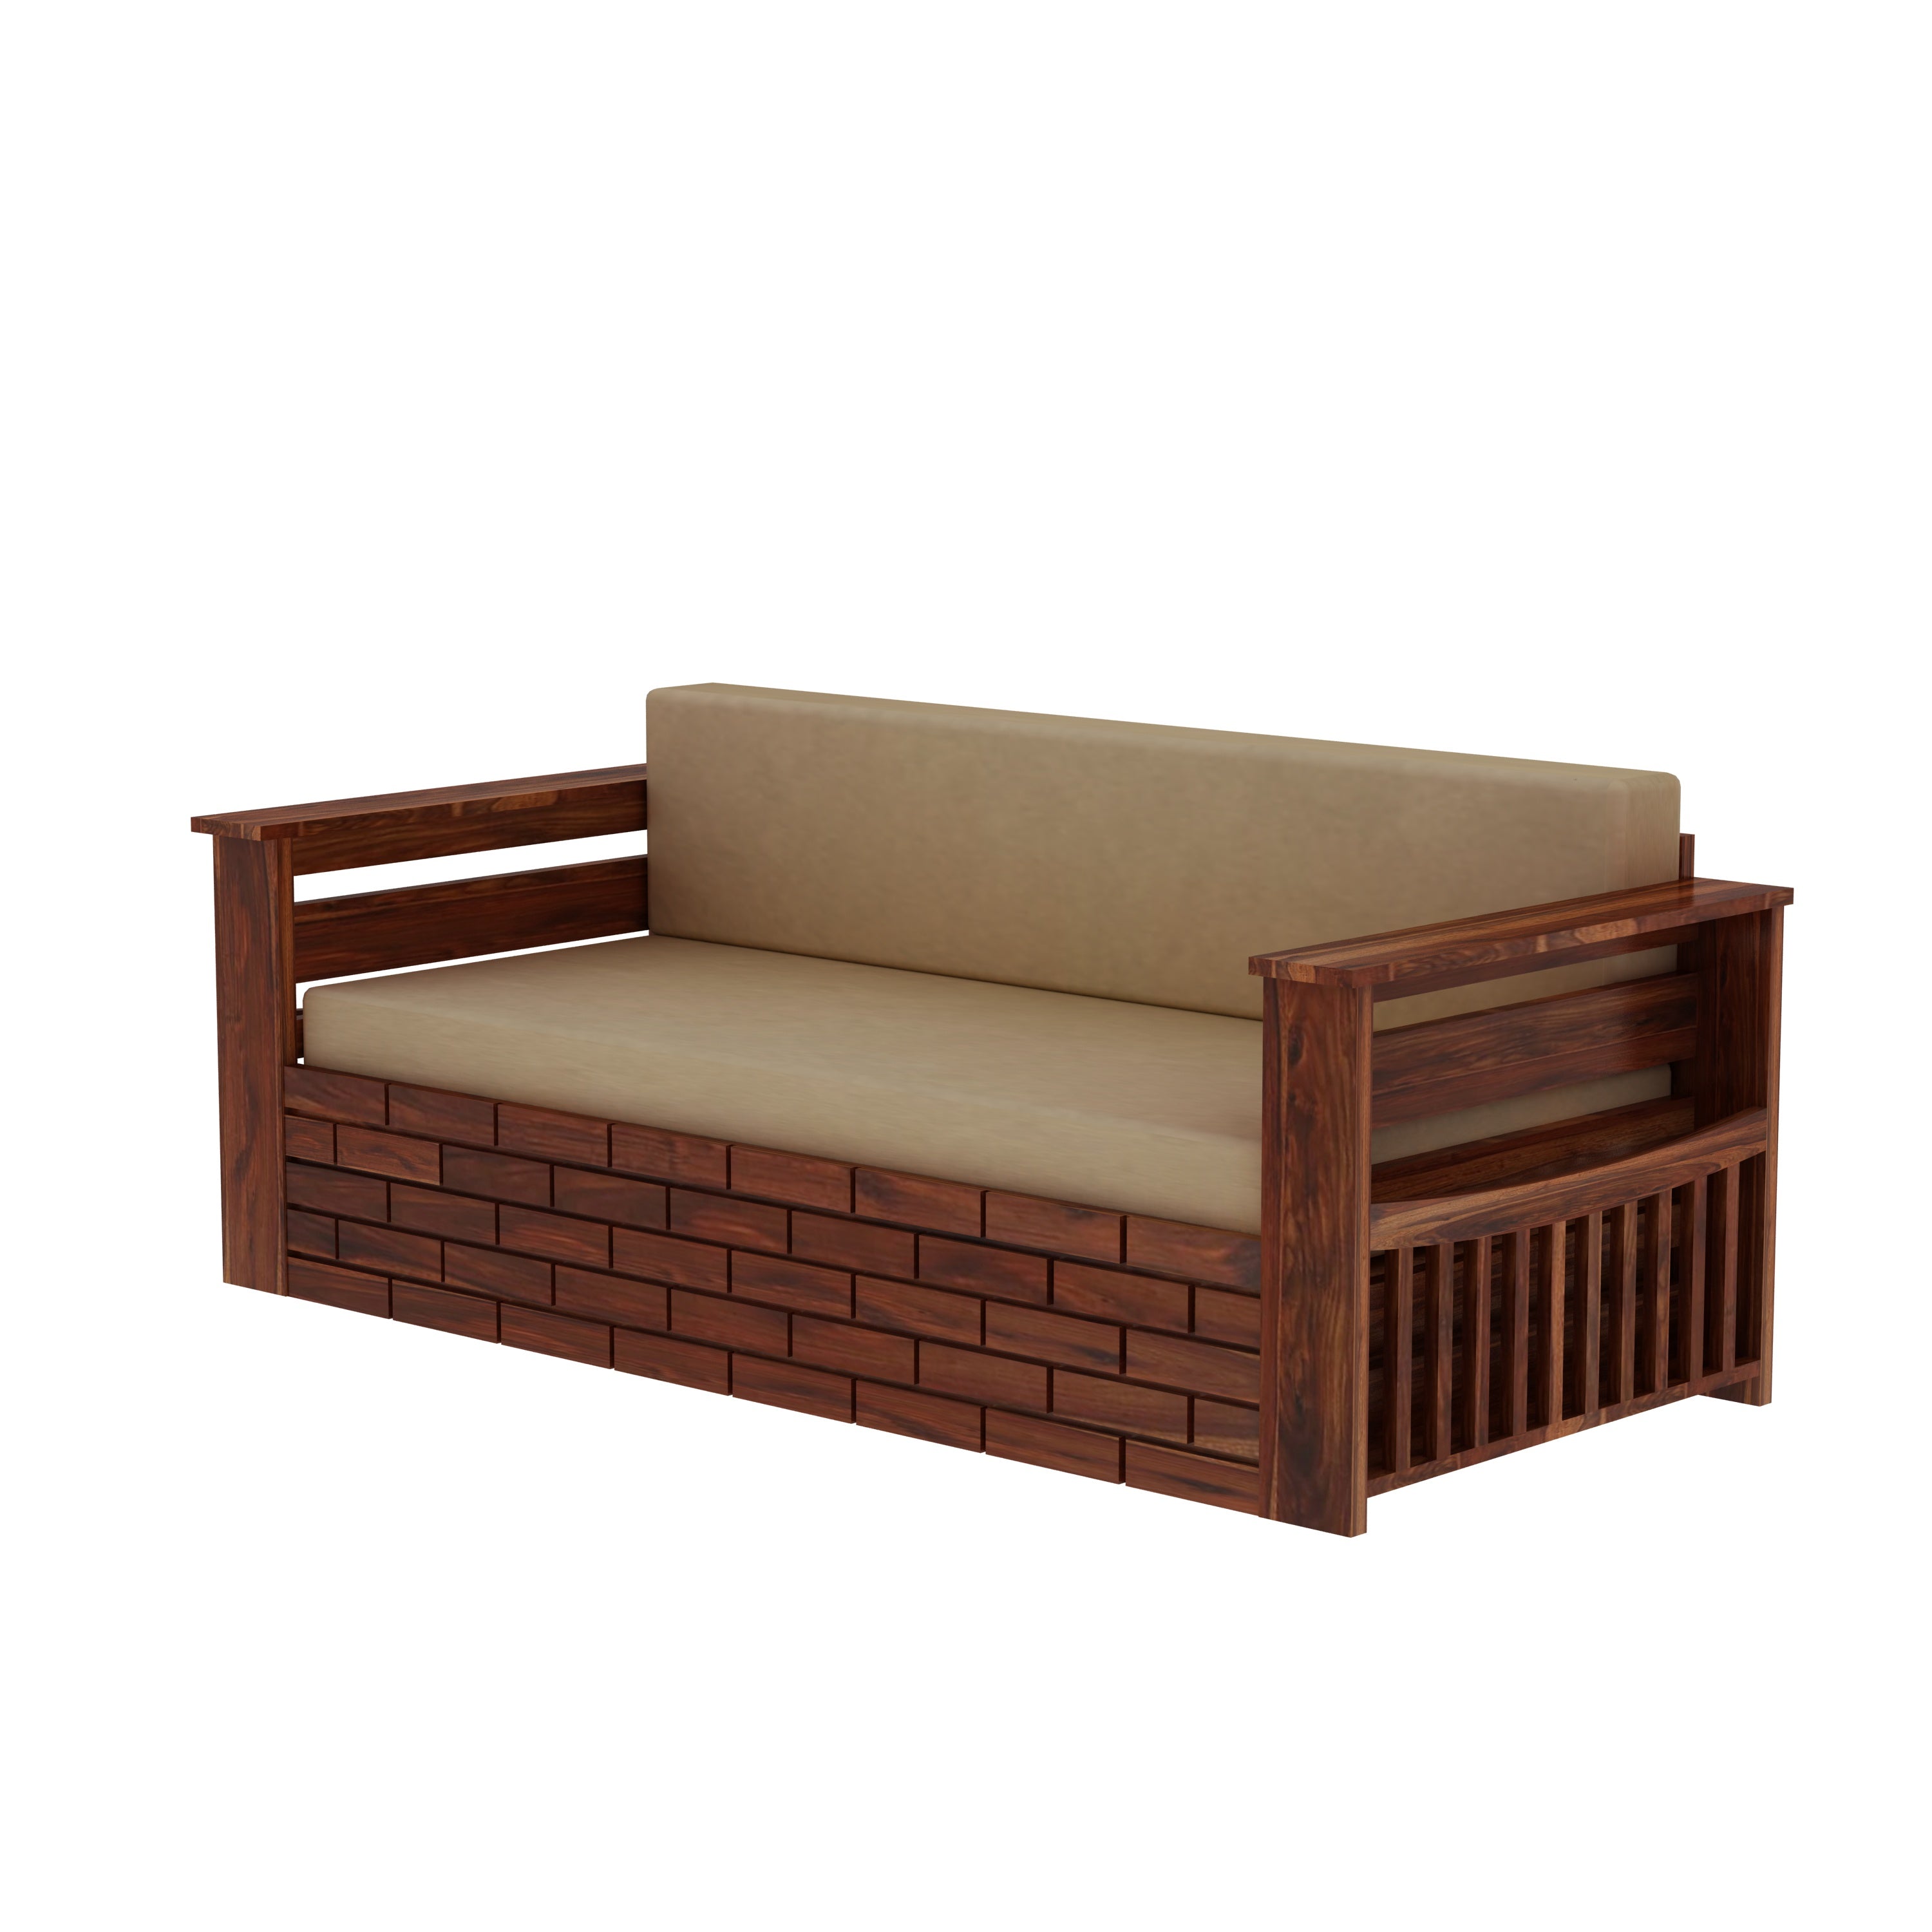 Elementra Solid Sheesham Wood 3 Seater Sofa Cum Bed With Storage (Natural Finish)